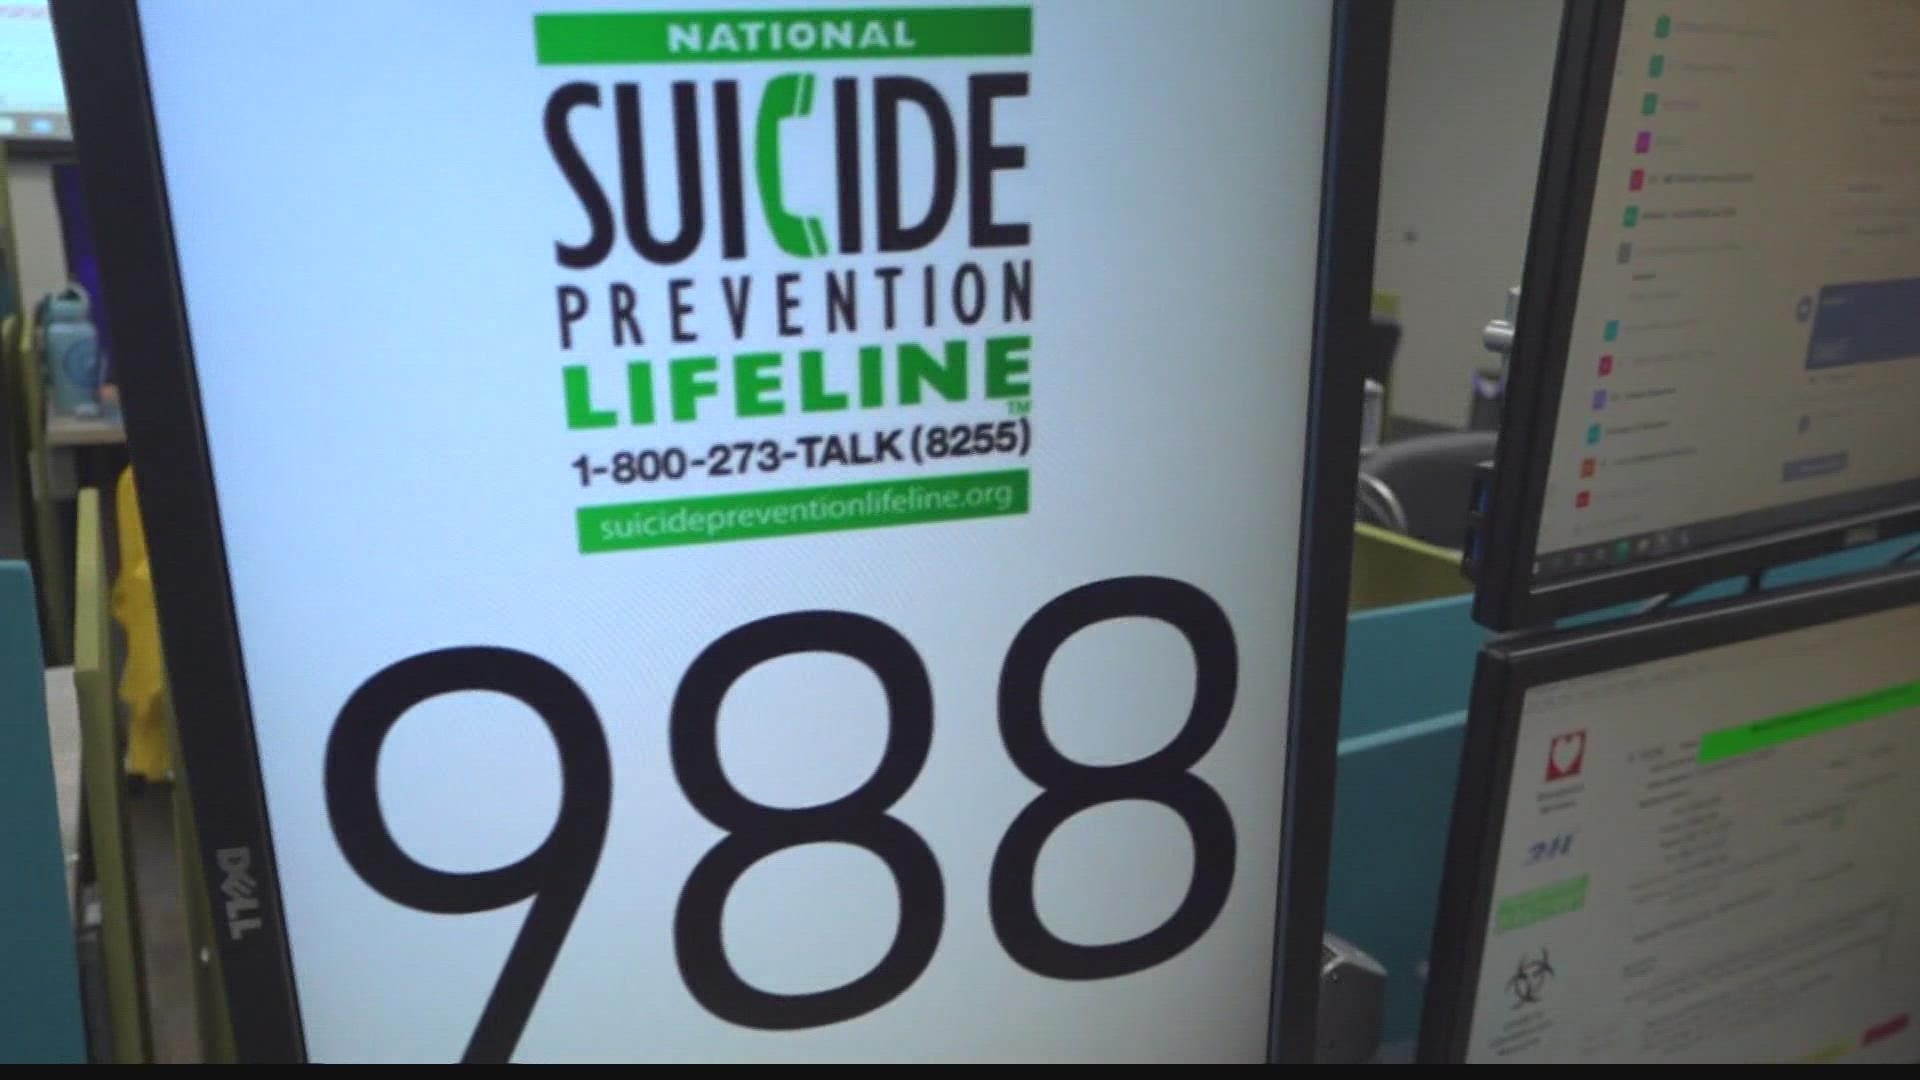 It's a little easier for anyone seeking help with a mental health crisis to get help now. Over the weekend, 988 went live.